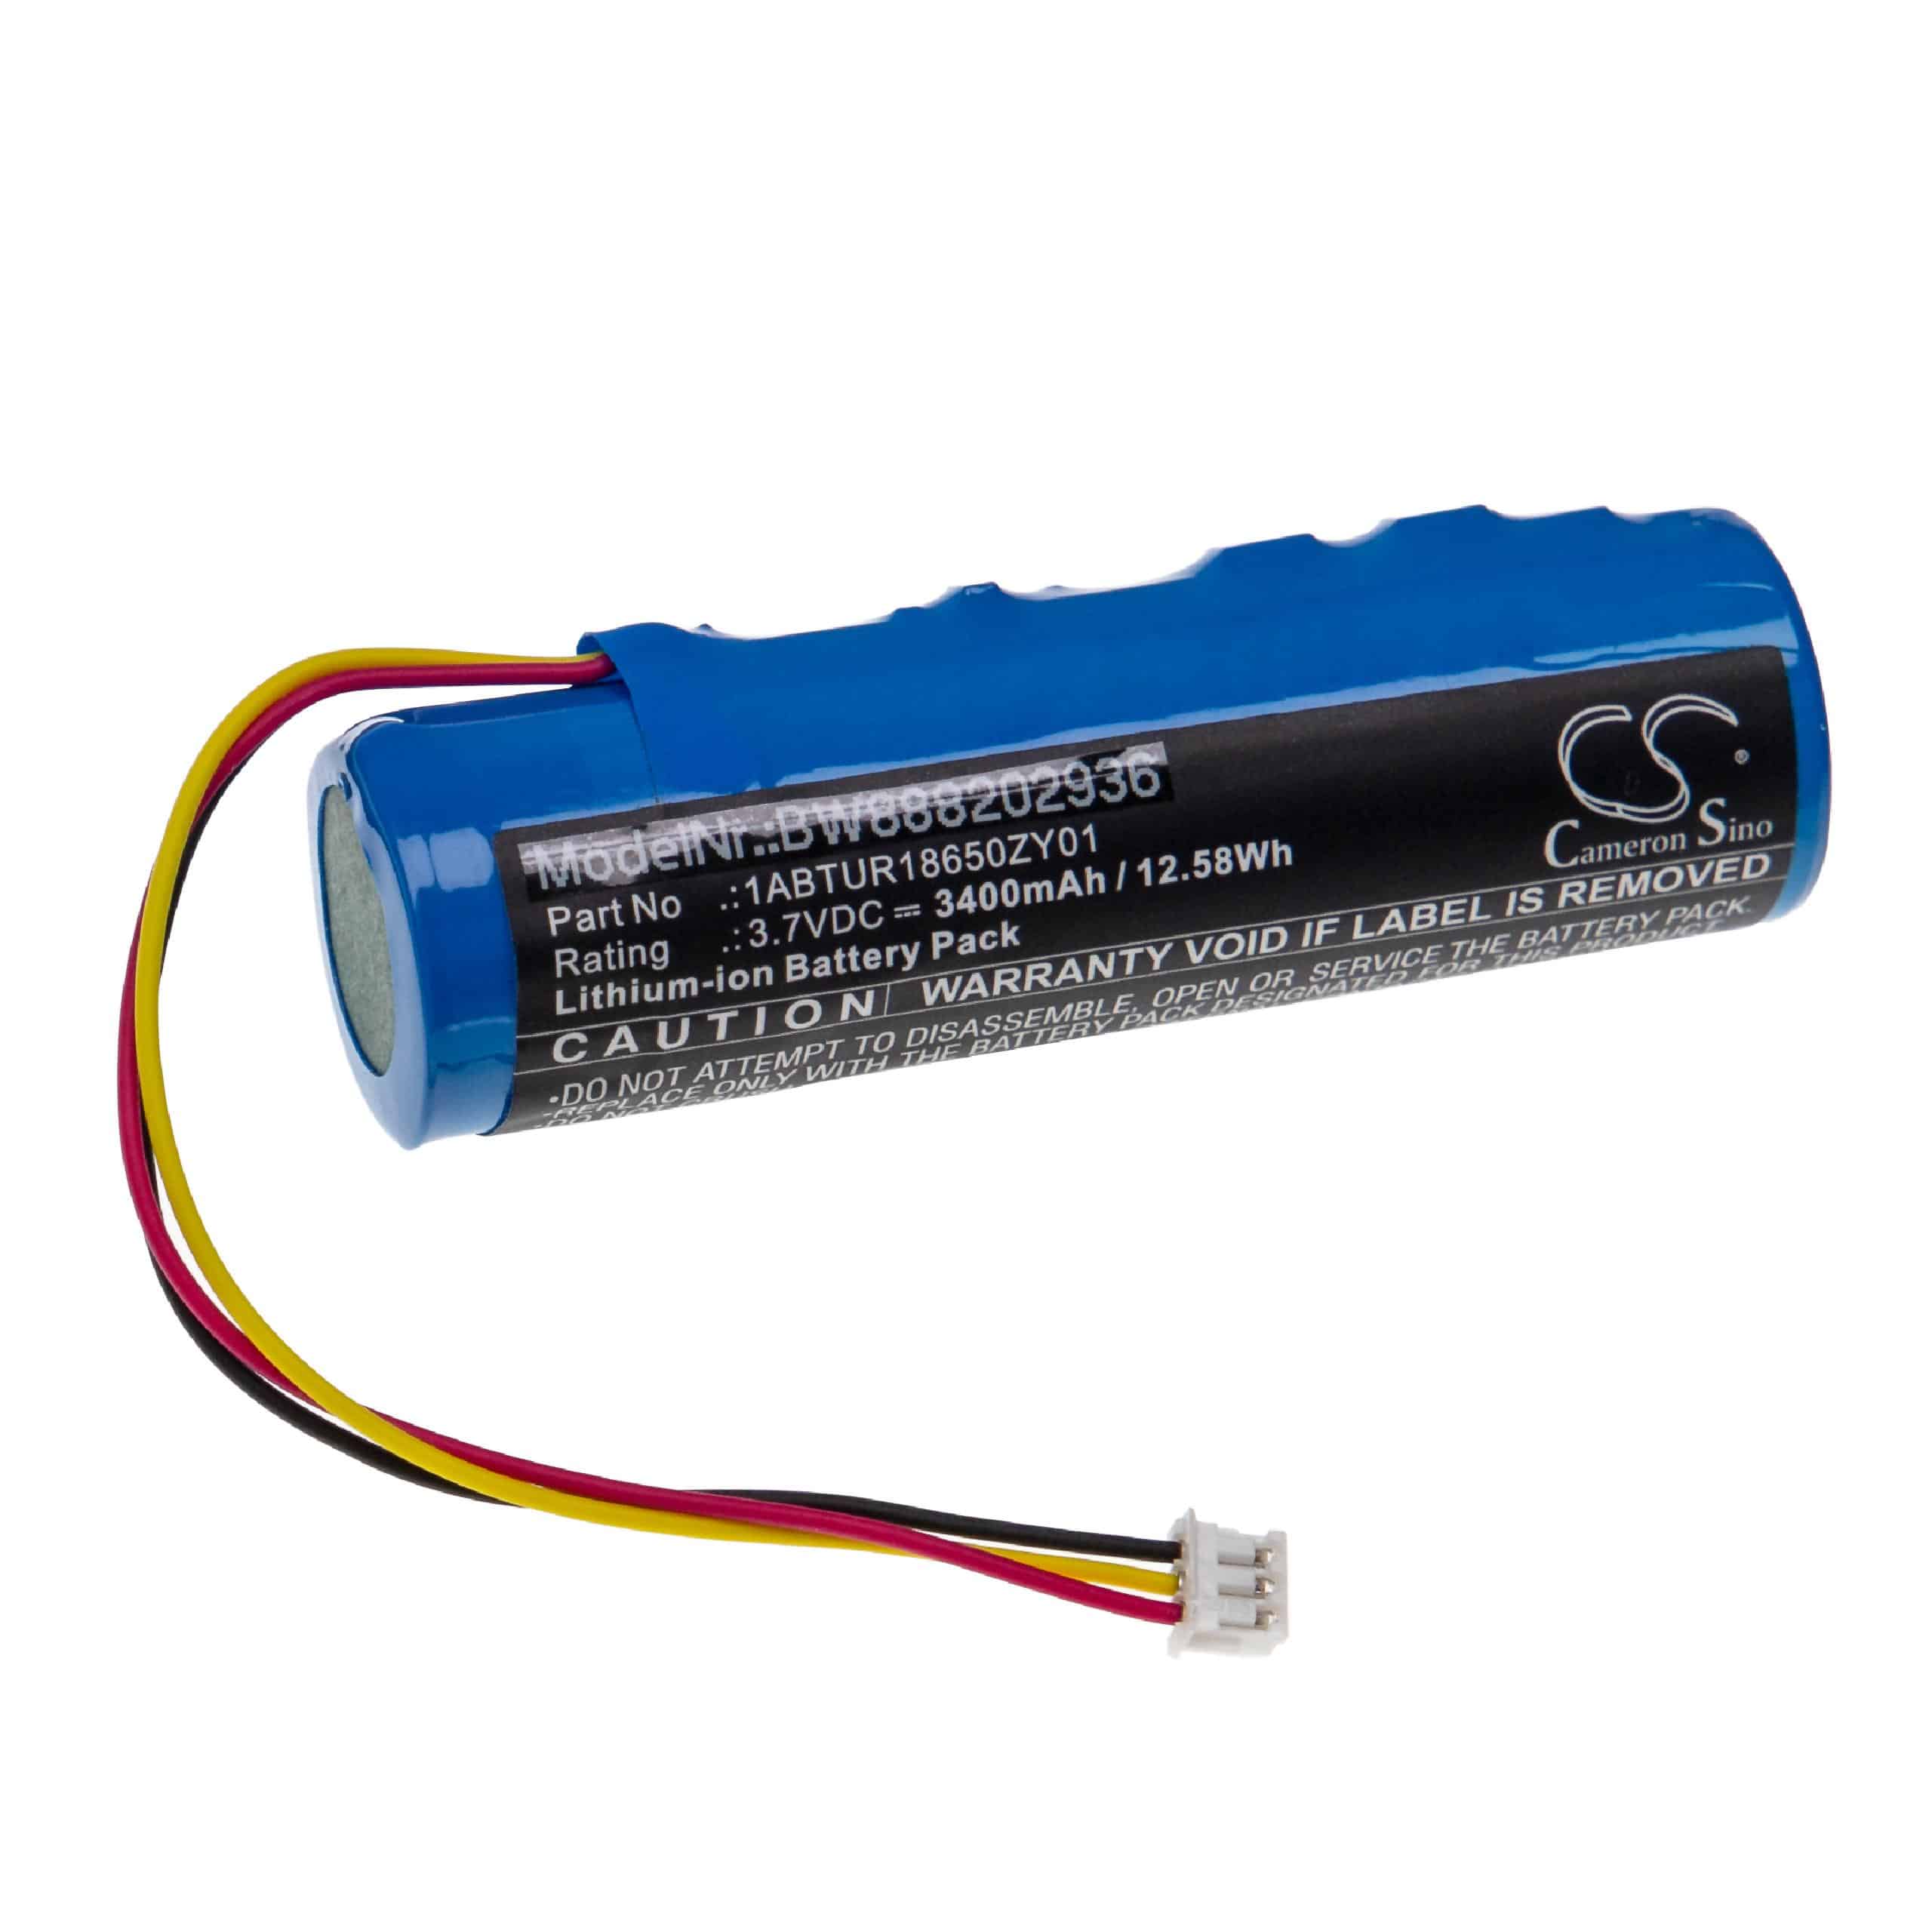 Wind Instrument Battery Replacement for AKAI 1ABTUR18650ZY01, NB2537-R0 - 3400mAh 3.7V Li-ion